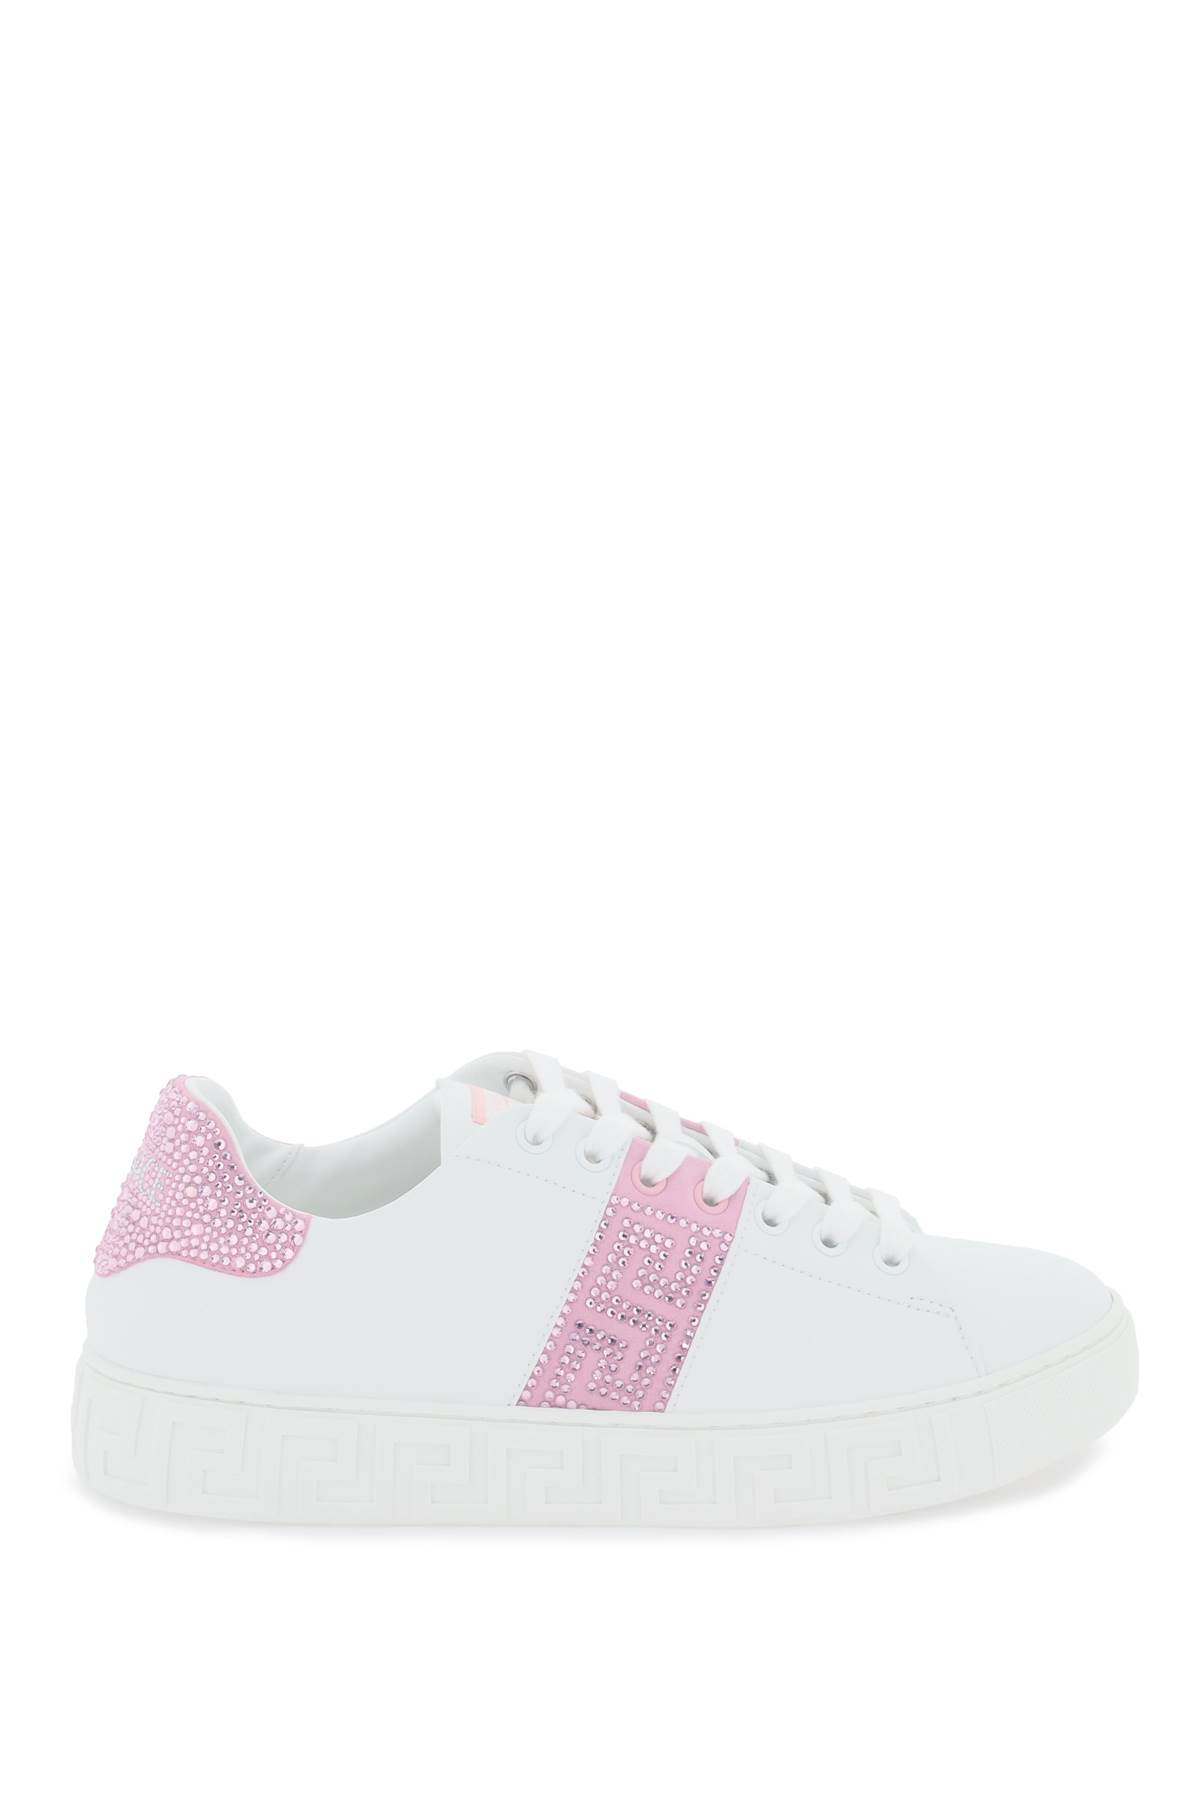 Shop Versace Greca Sneakers With Crystals In White Pale Pink (white)